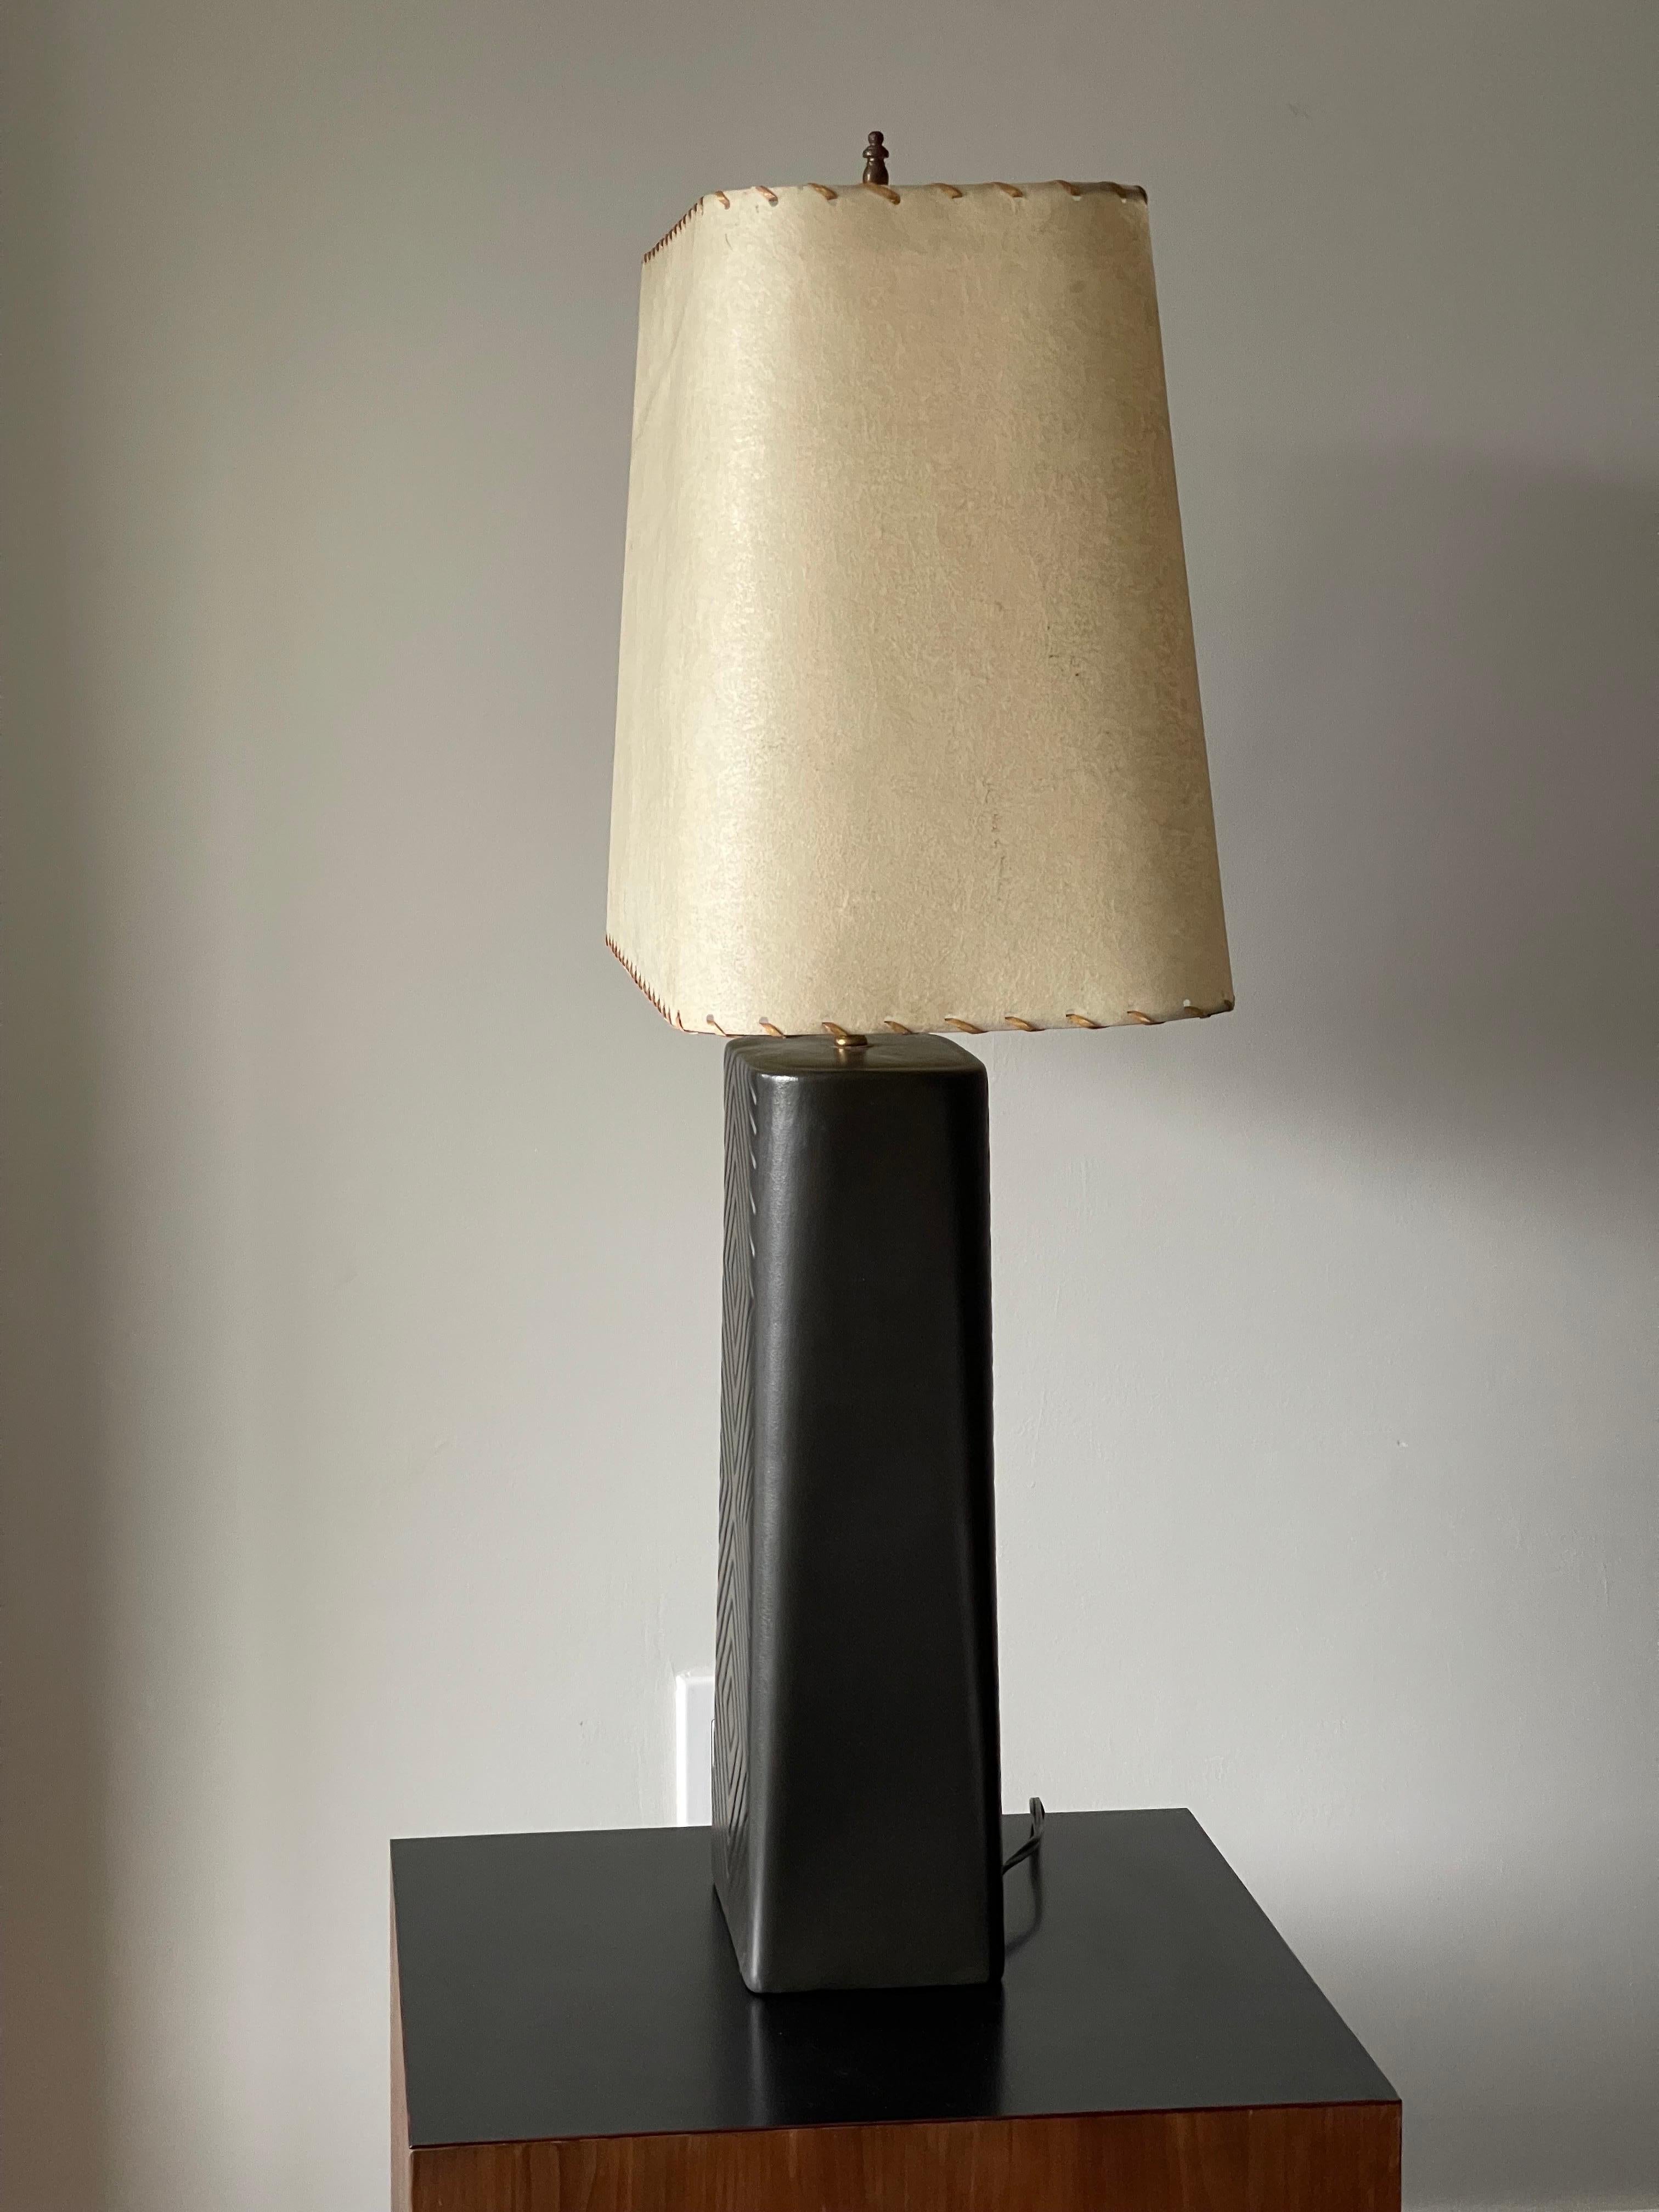 Large Mid-Century Modern Ceramic Table Lamp with Original Shade  For Sale 8